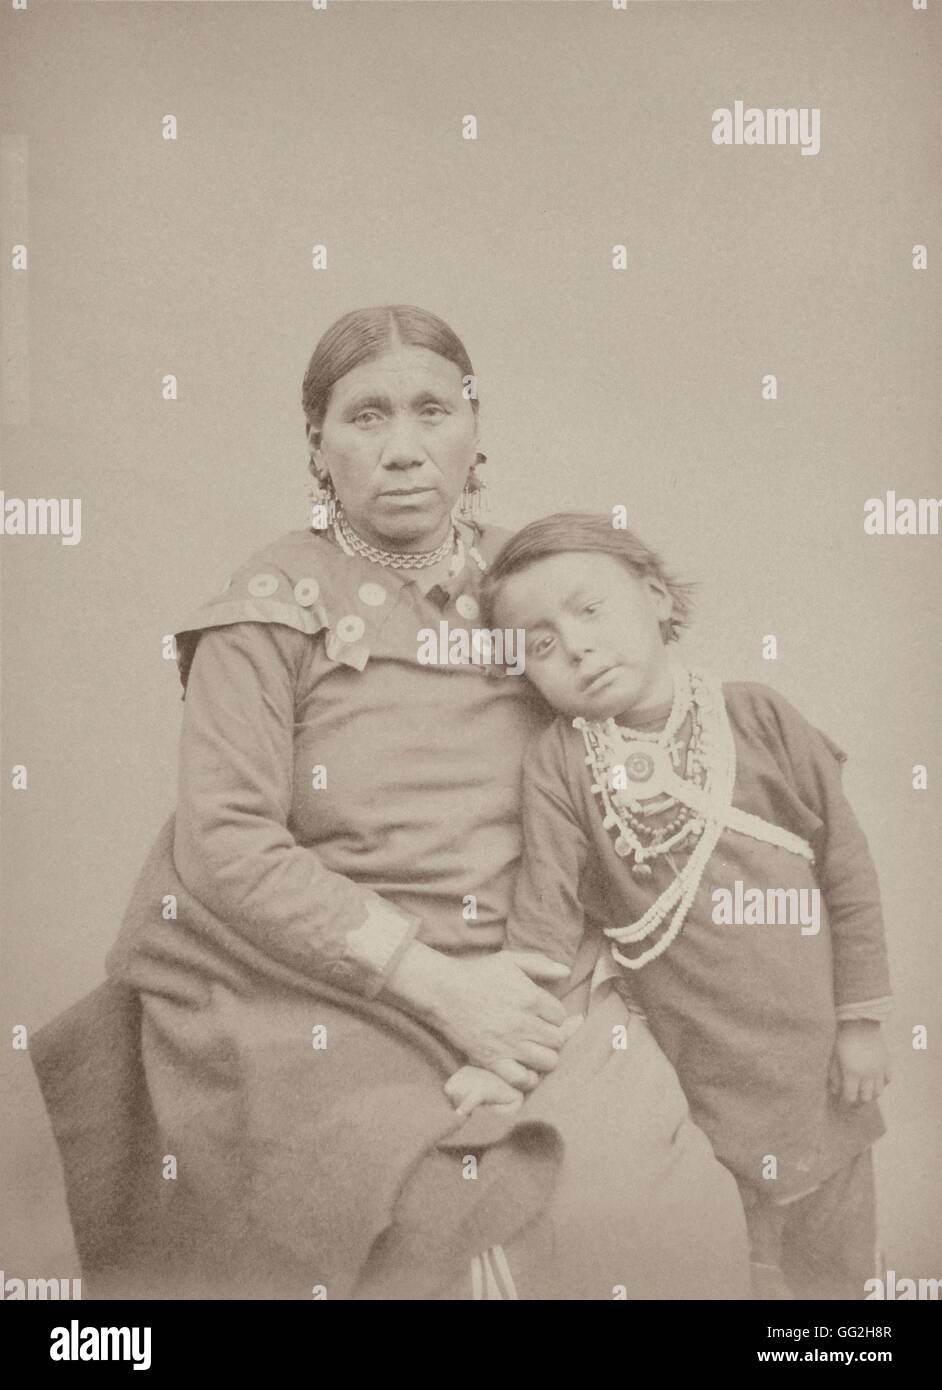 Beautiful Hill (Va-shesh-na-bé), from the Omaha Tribe. She's 35 and is the daughter of a famous Chief called Big-Eye (Inshta-Tanga). She's married to Village-Maker. On the photograph, her son of 5 is posing: he has no name (according to the Indian traditi Stock Photo